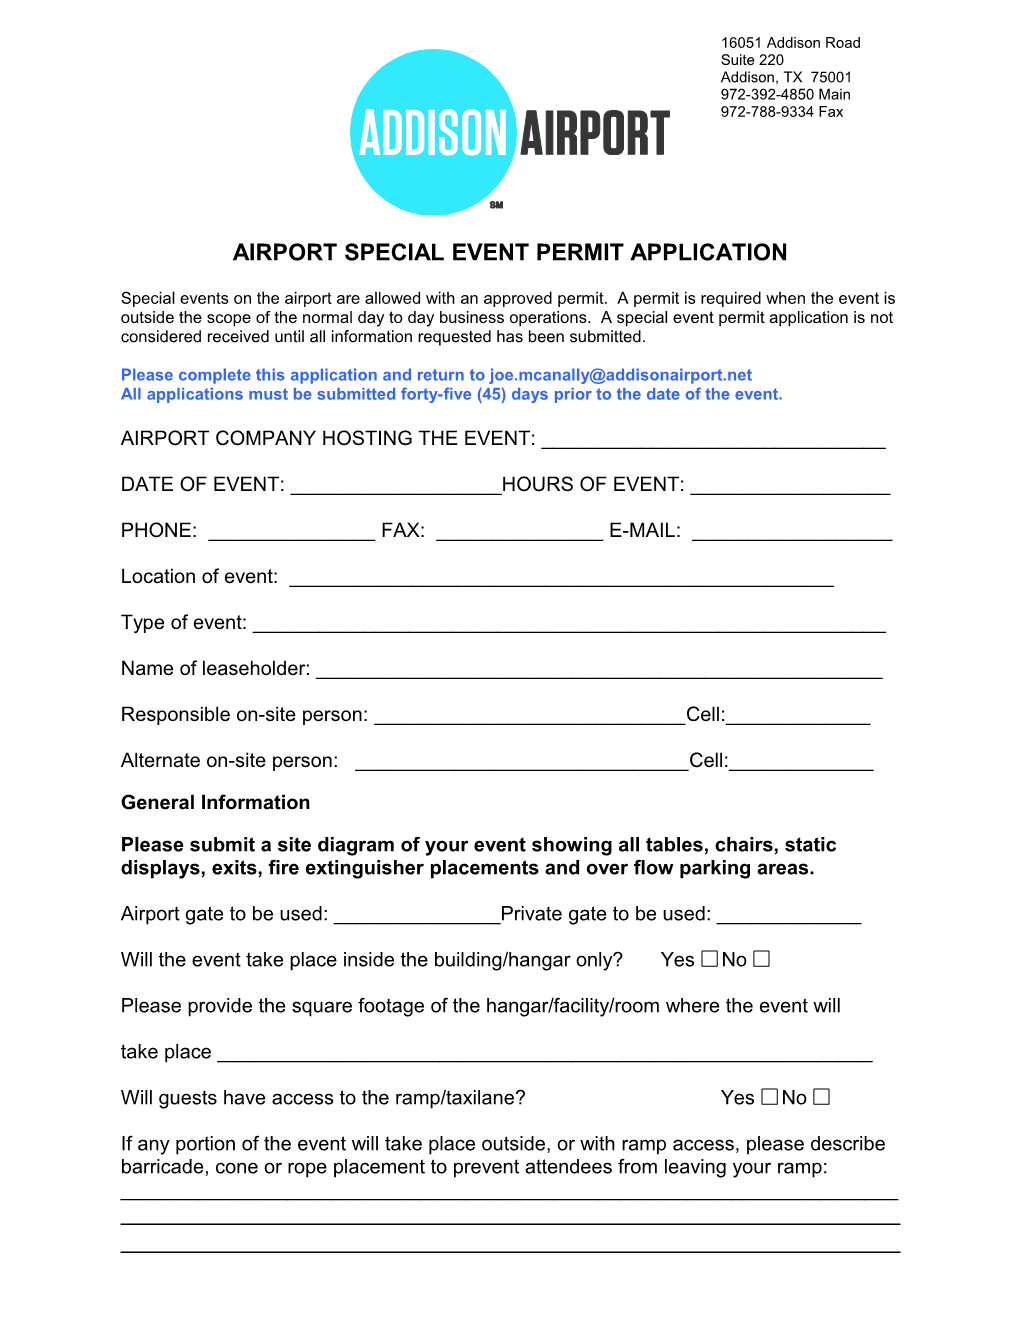 Airport Special Event Permit Application